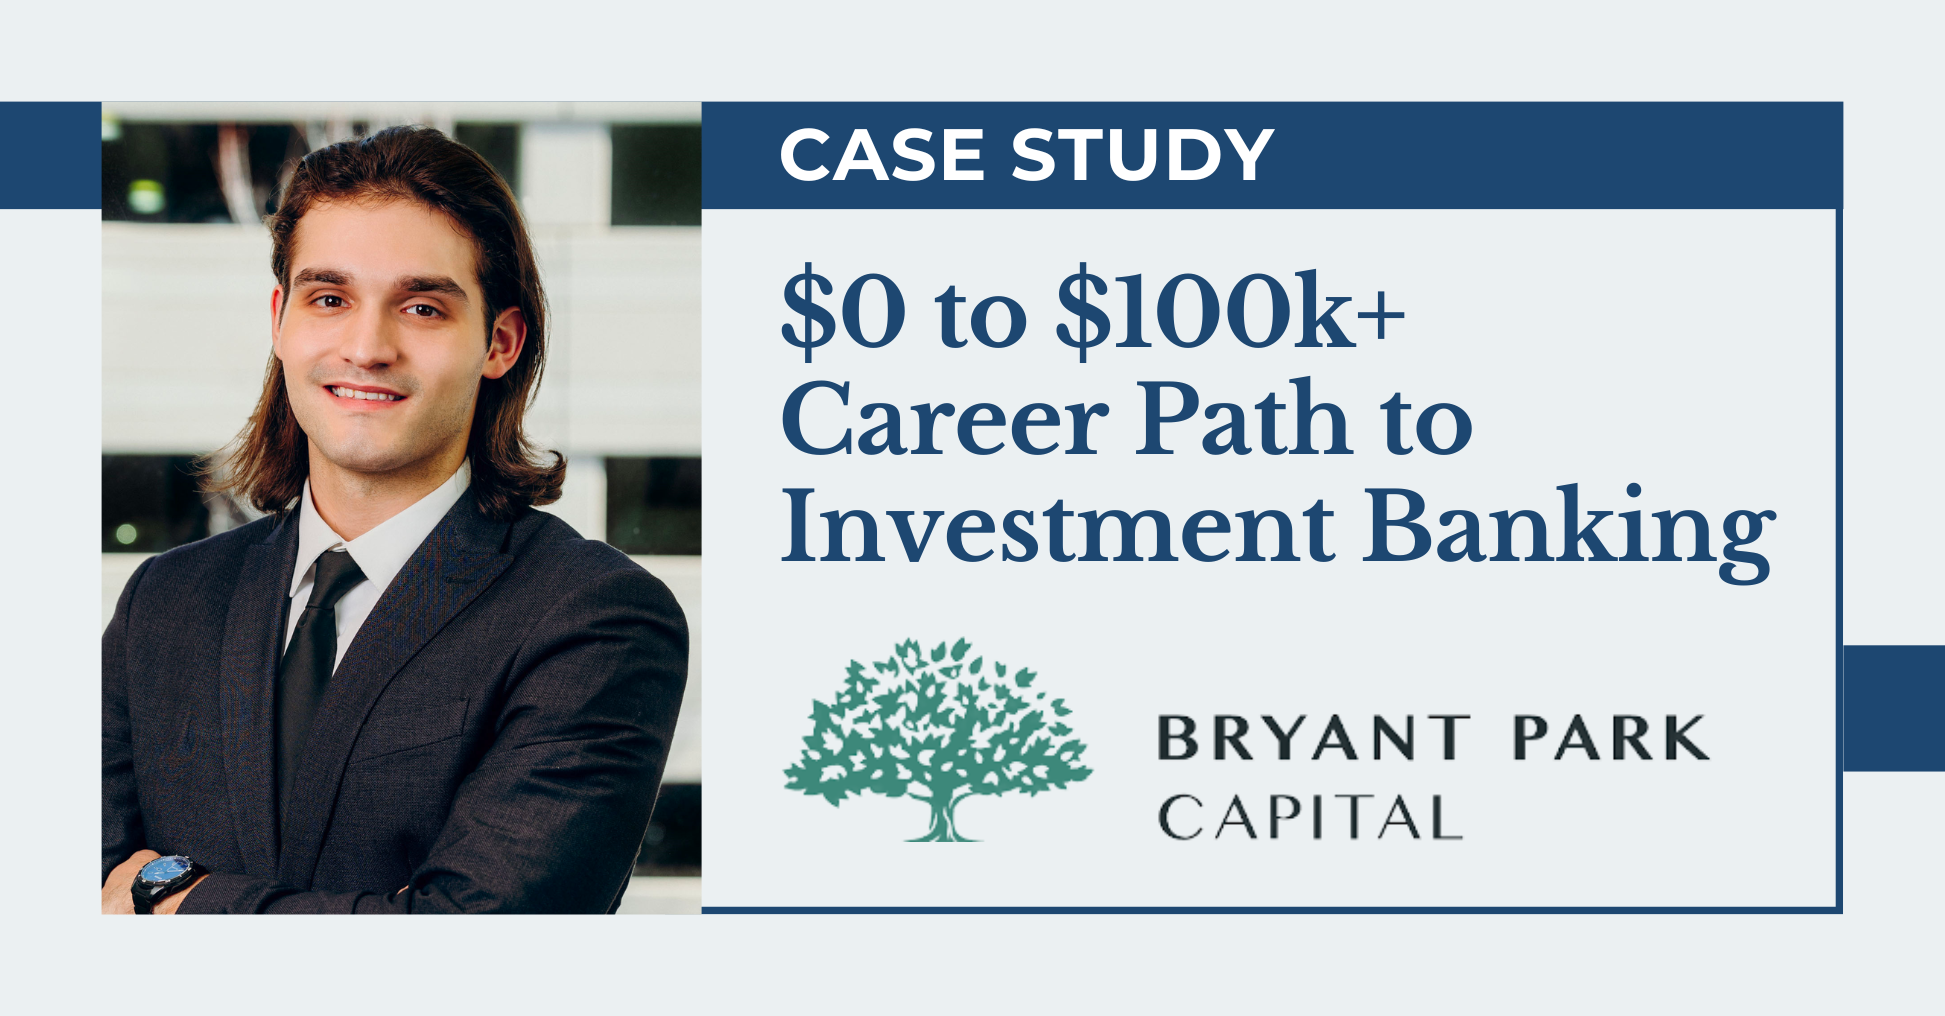 APP Student Goes From $0 to $100k Salary; Career Path to Investment Banking